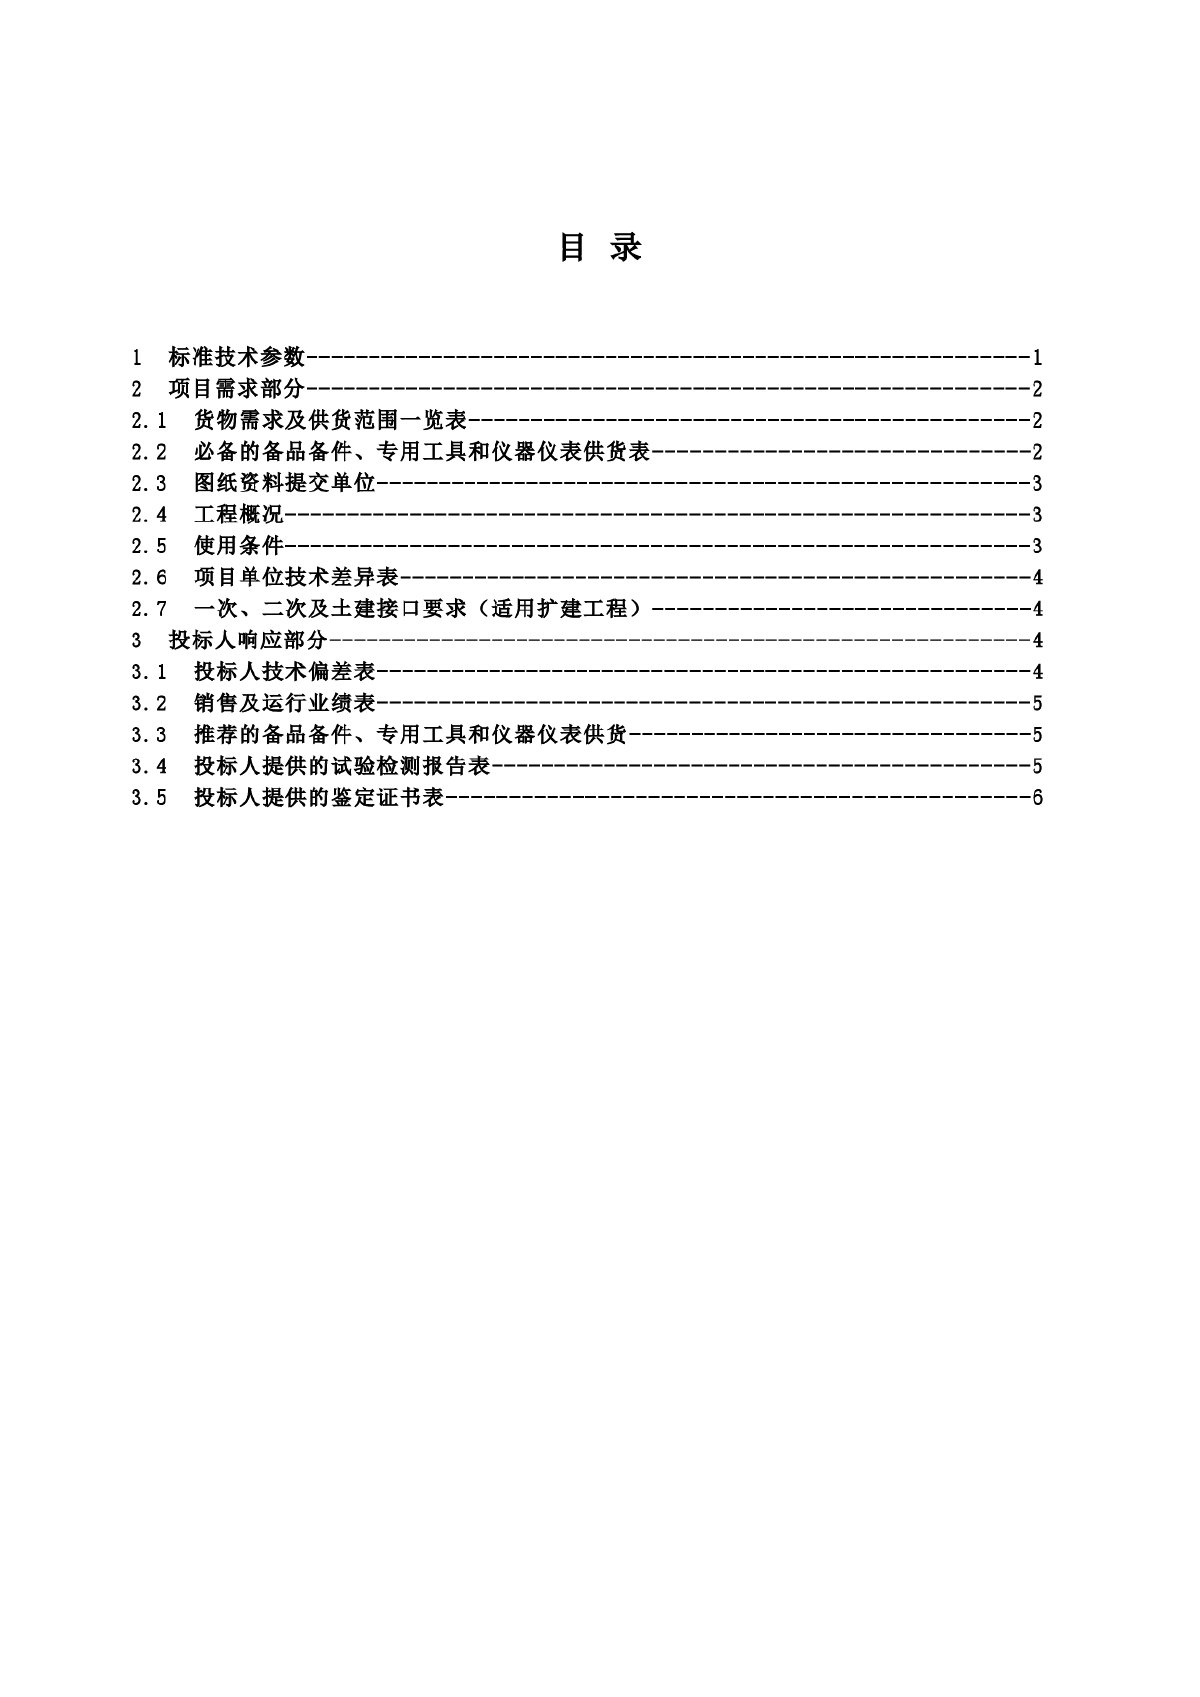  Special Technical Specification for Time Synchronization Device of Substation - Figure 2